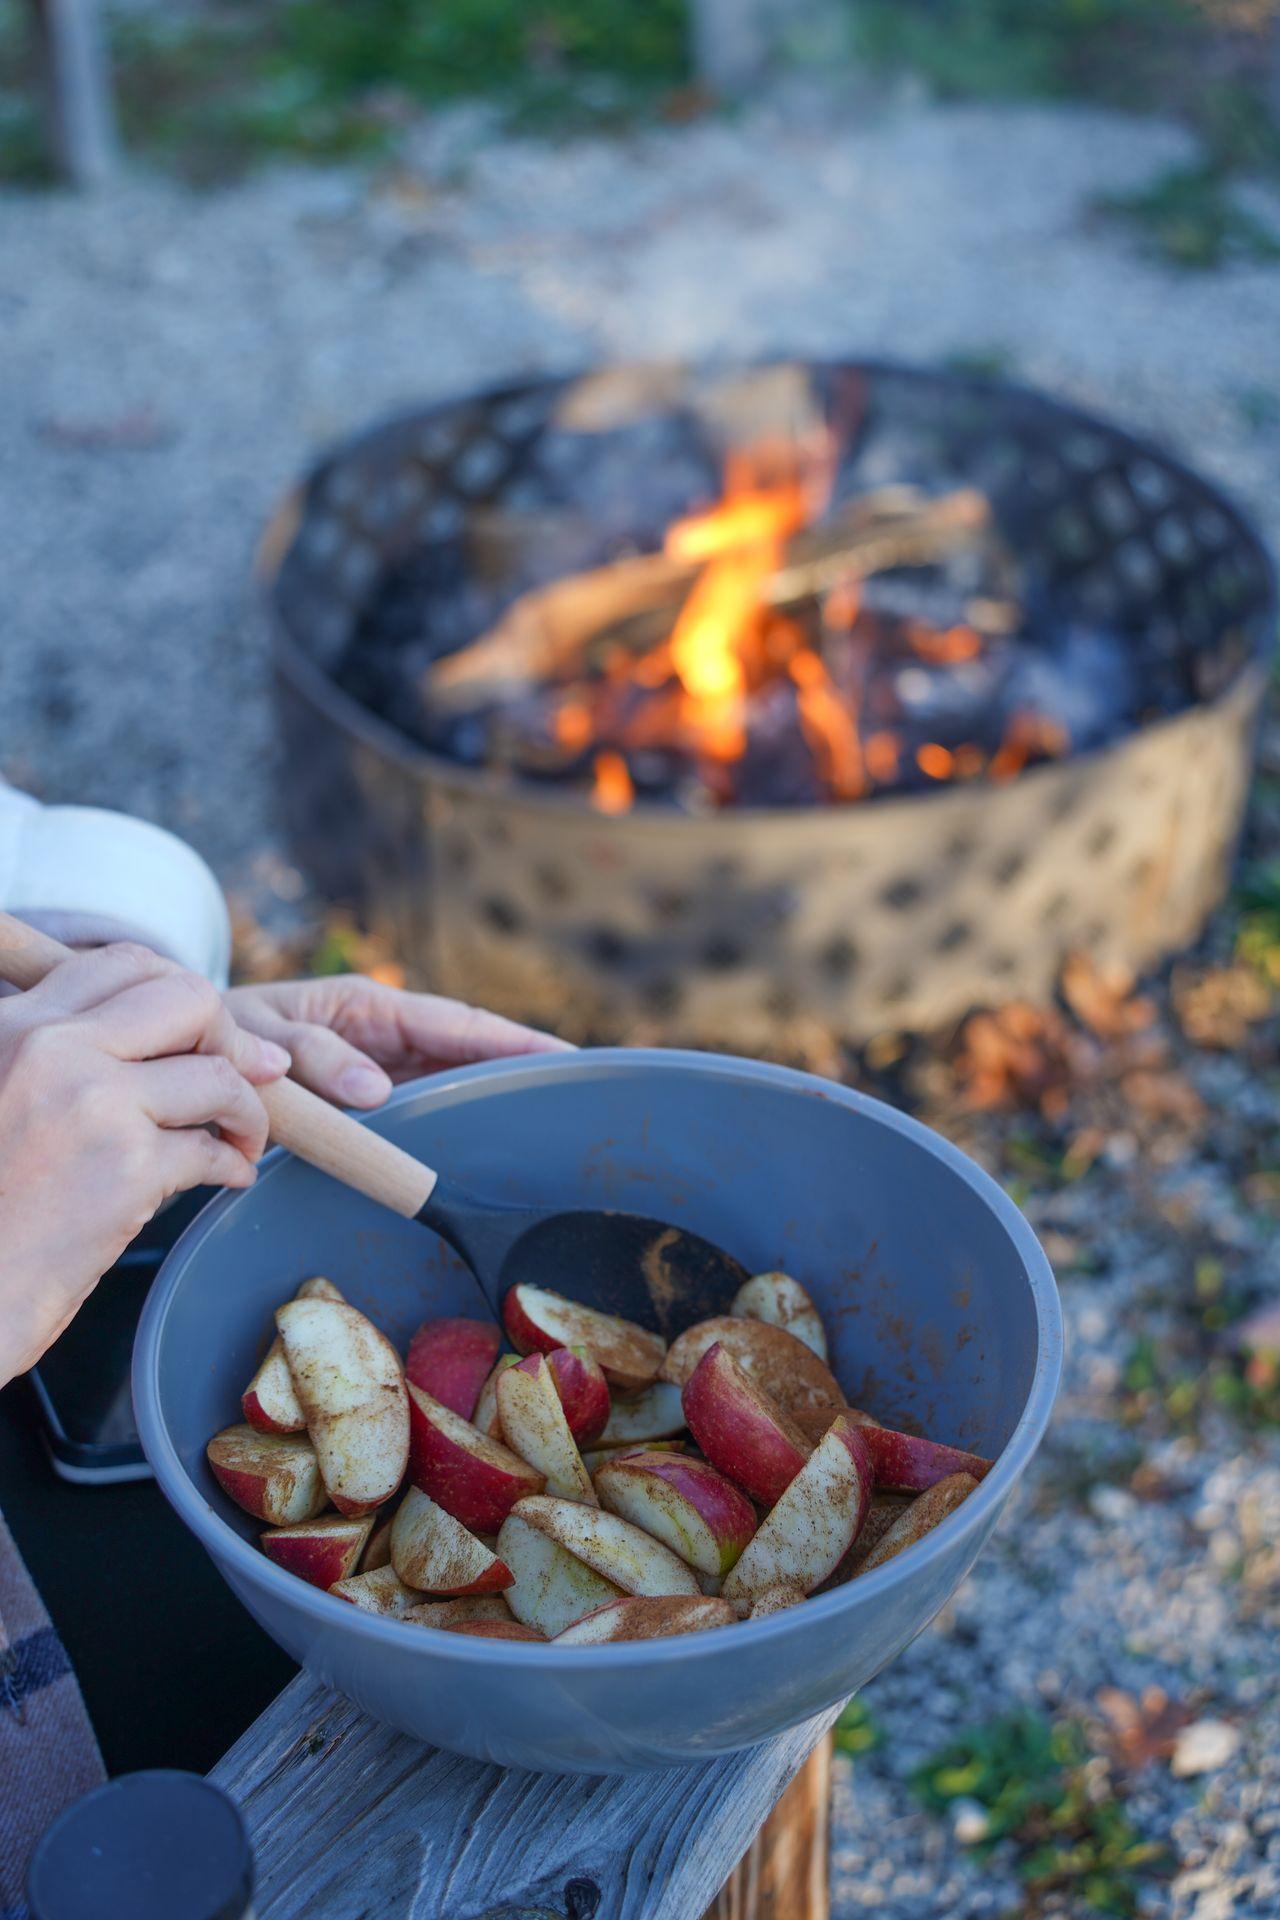 Mixing up apples with sugar in a bowl next to a campfire.